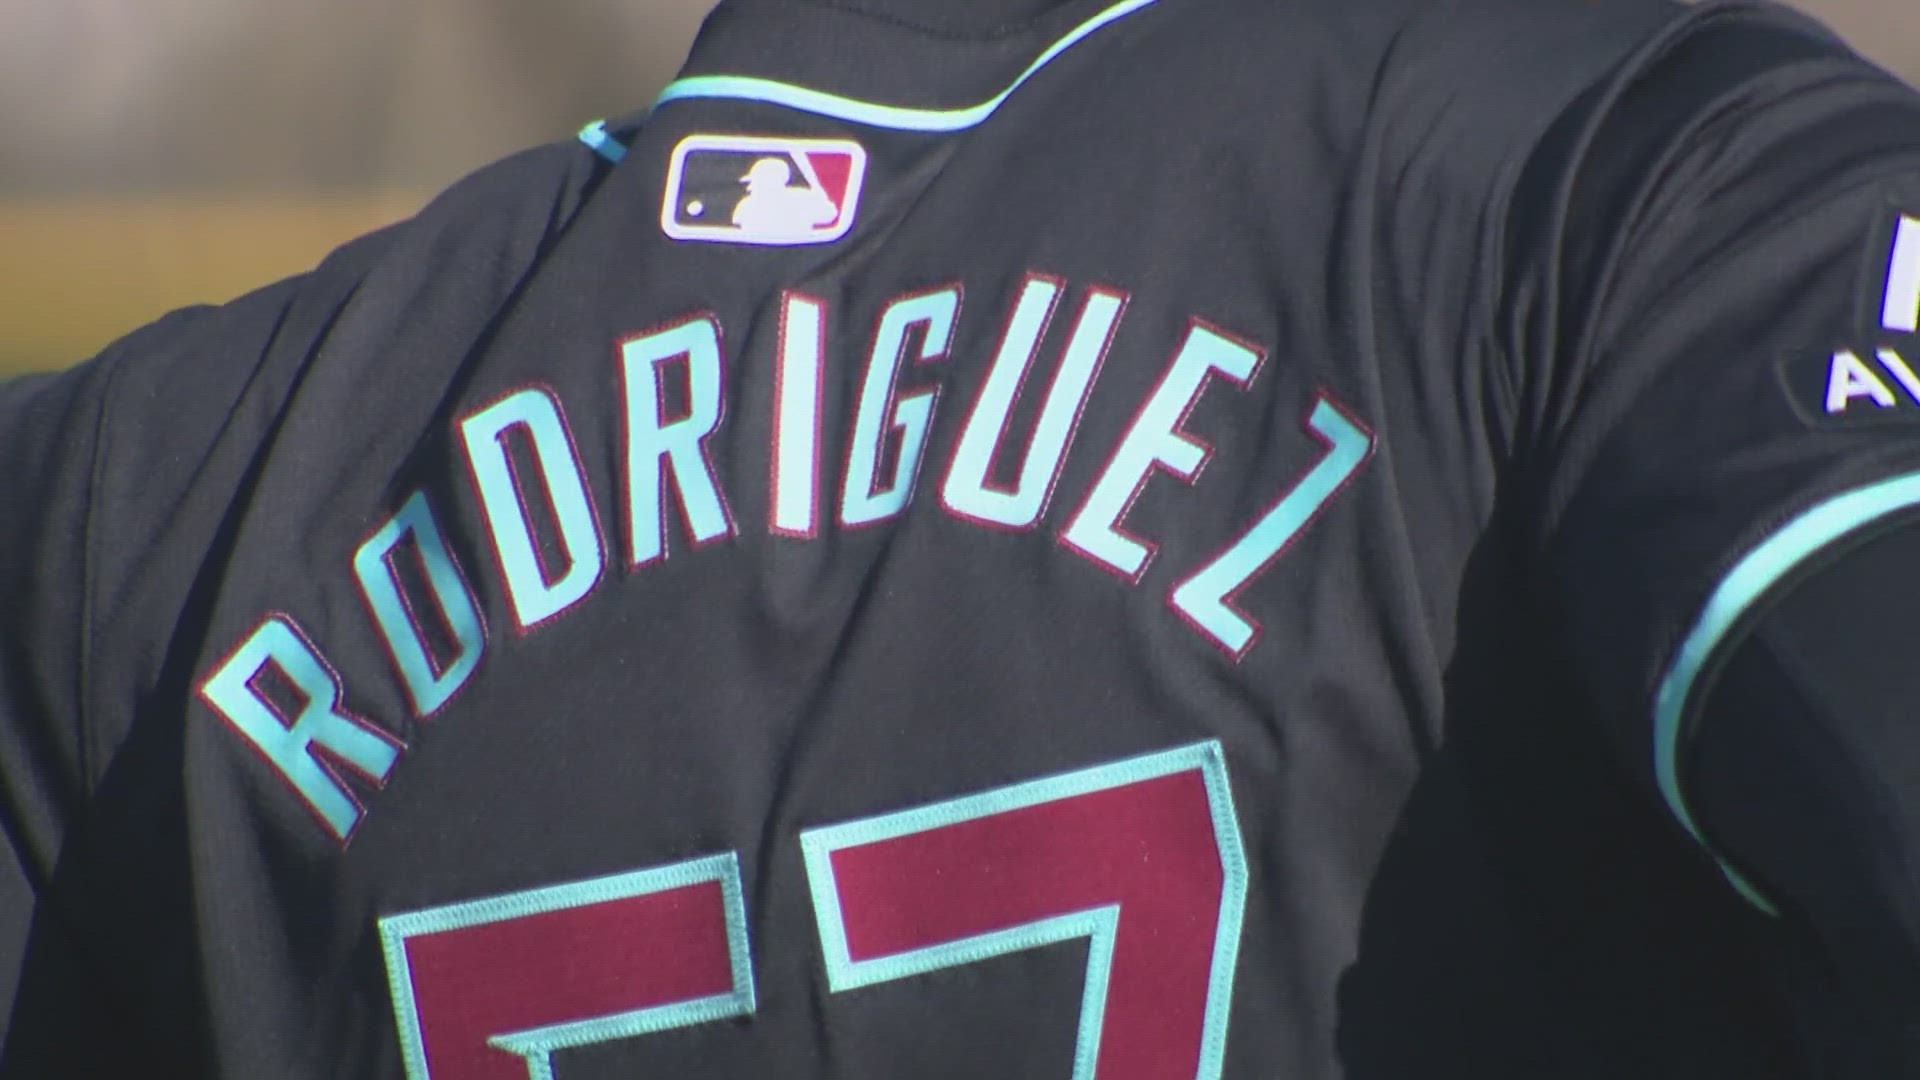 What are your thoughts on the Diamondbacks new threads?